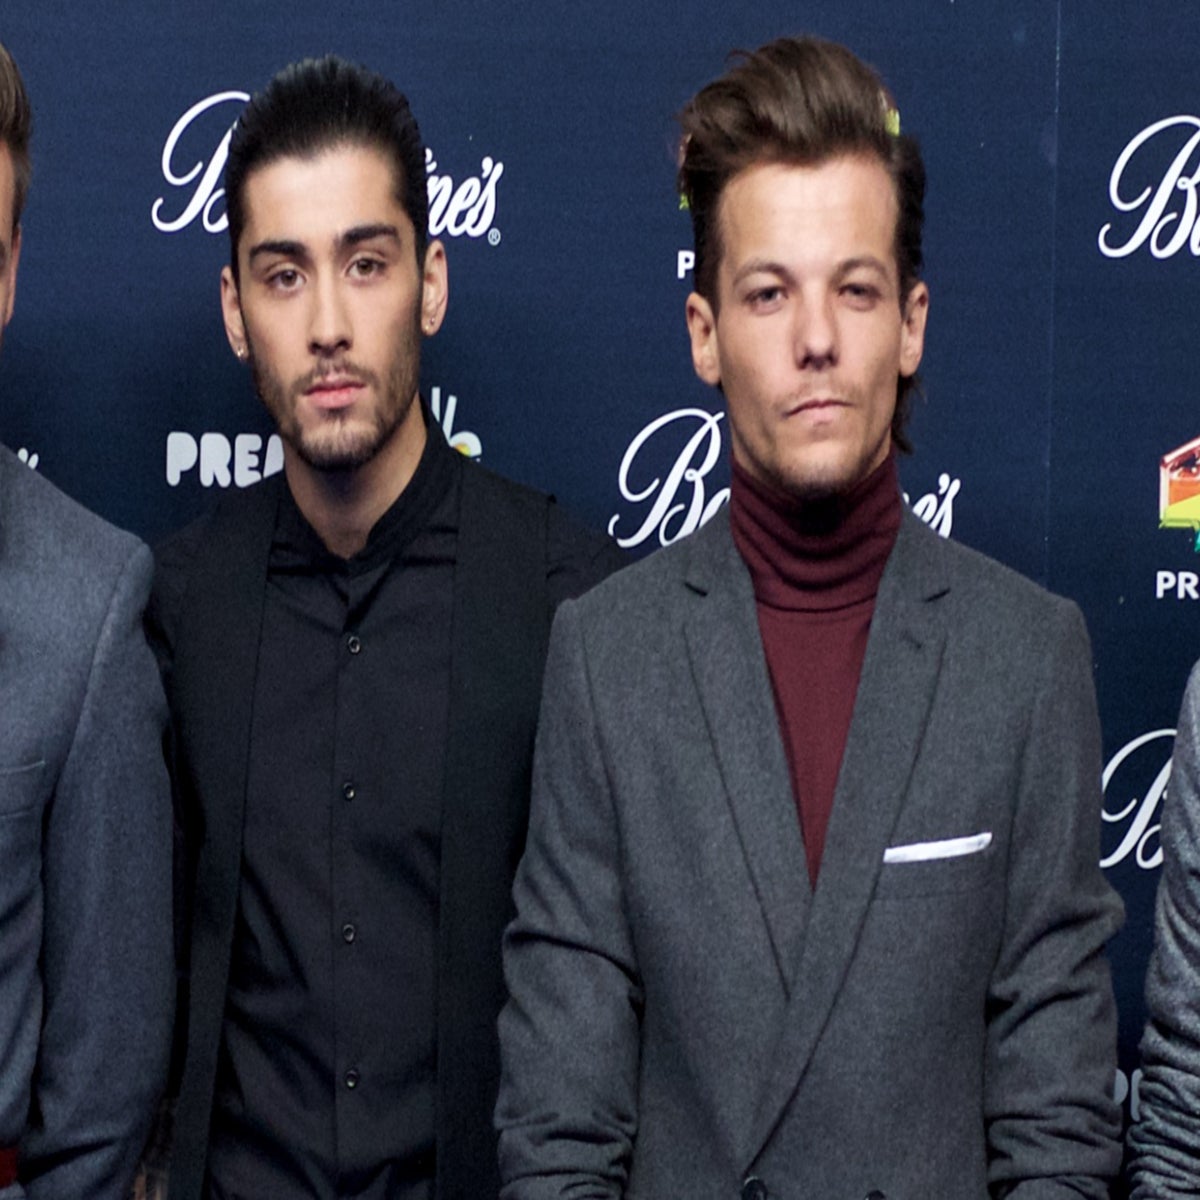 Louis Tomlinson Says Zayn Malik's Recent 1D Covers Made Him 'Feel Good' But  Says to 'Ask Him' If They're Friends